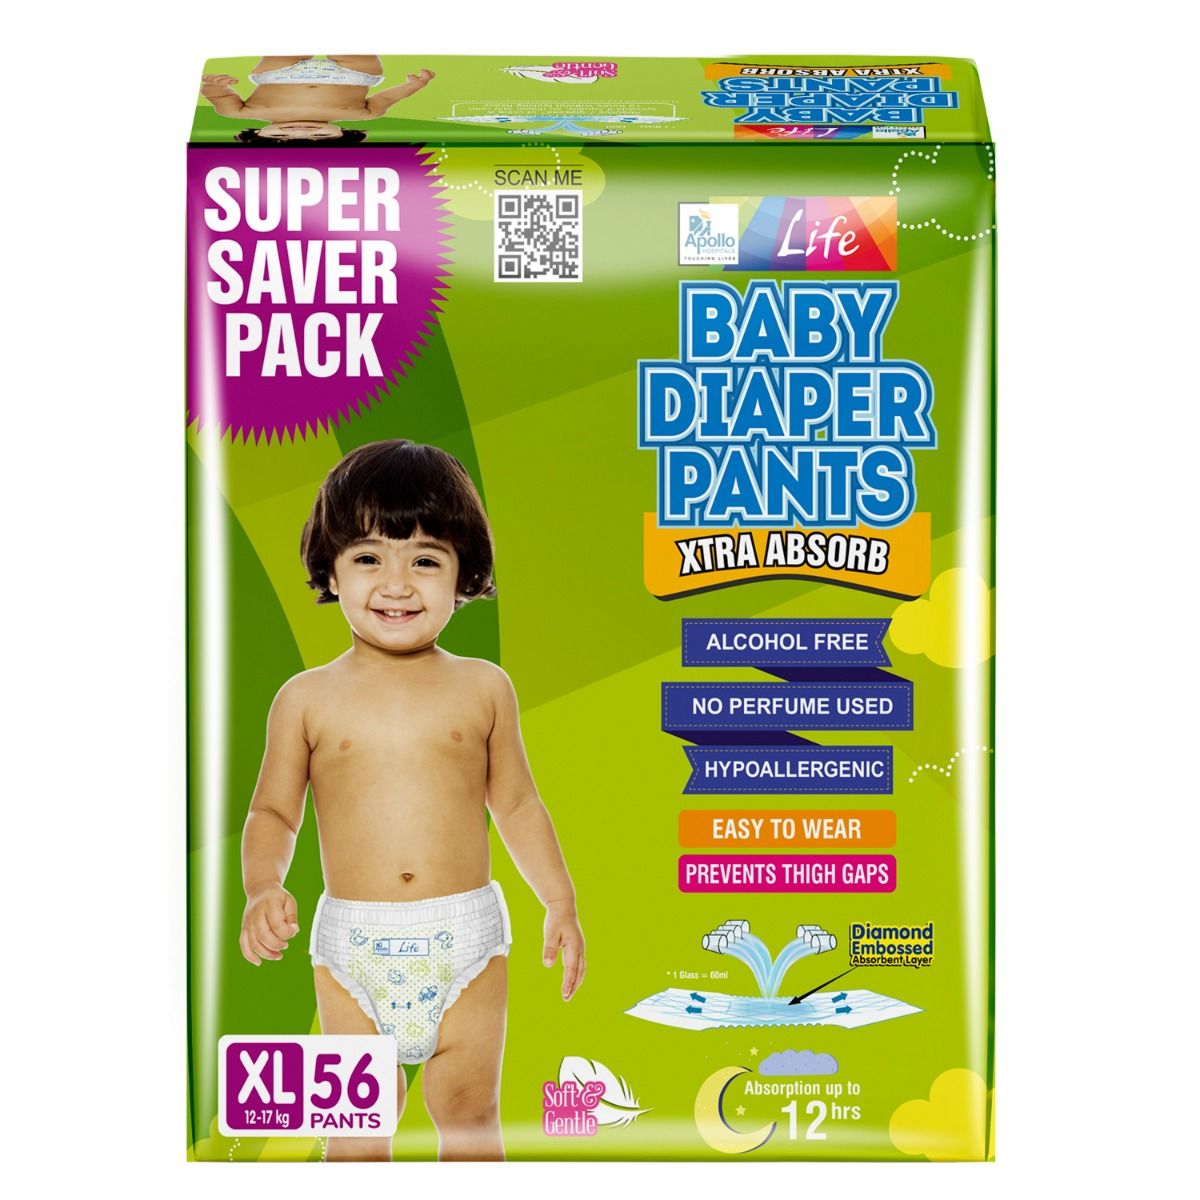 Buy Bumtum Ultra Slim Large Baby Diaper Pants 72 Count For Sensitive  Skin 12 Hrs ProtectionCottony Soft AntiRash Layer Wetness Indicator  Pack of 3 Online at Low Prices in India  Amazonin